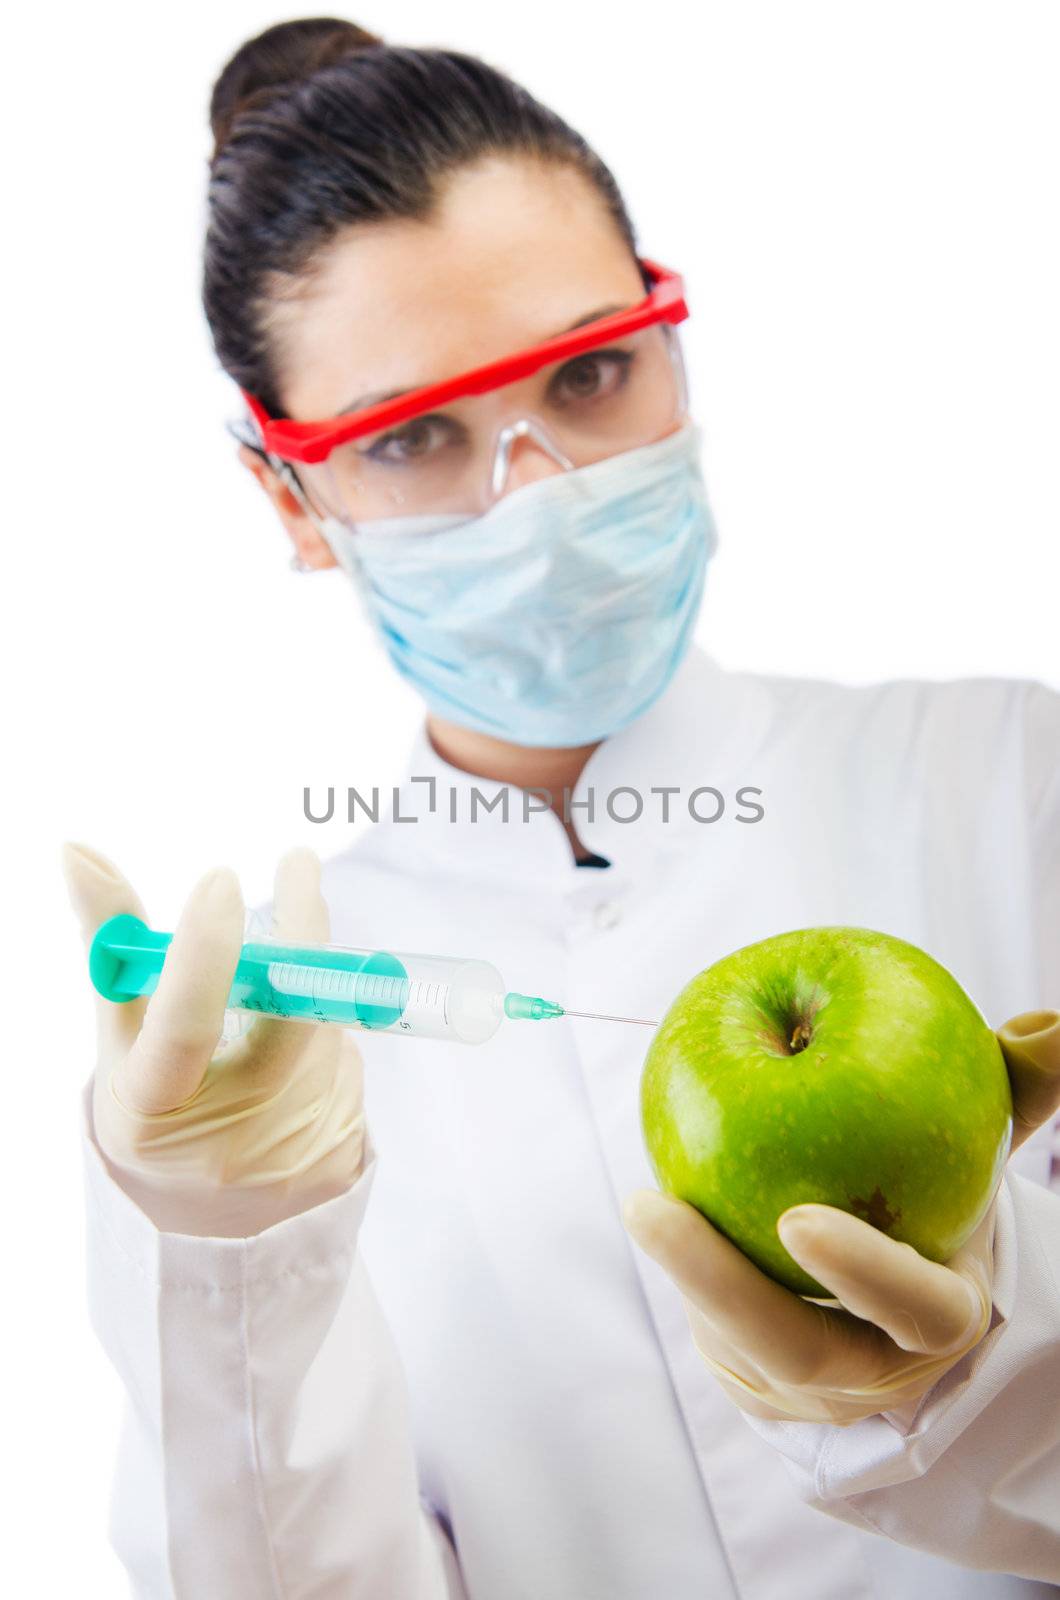 Chemical experiment with apple and syringe